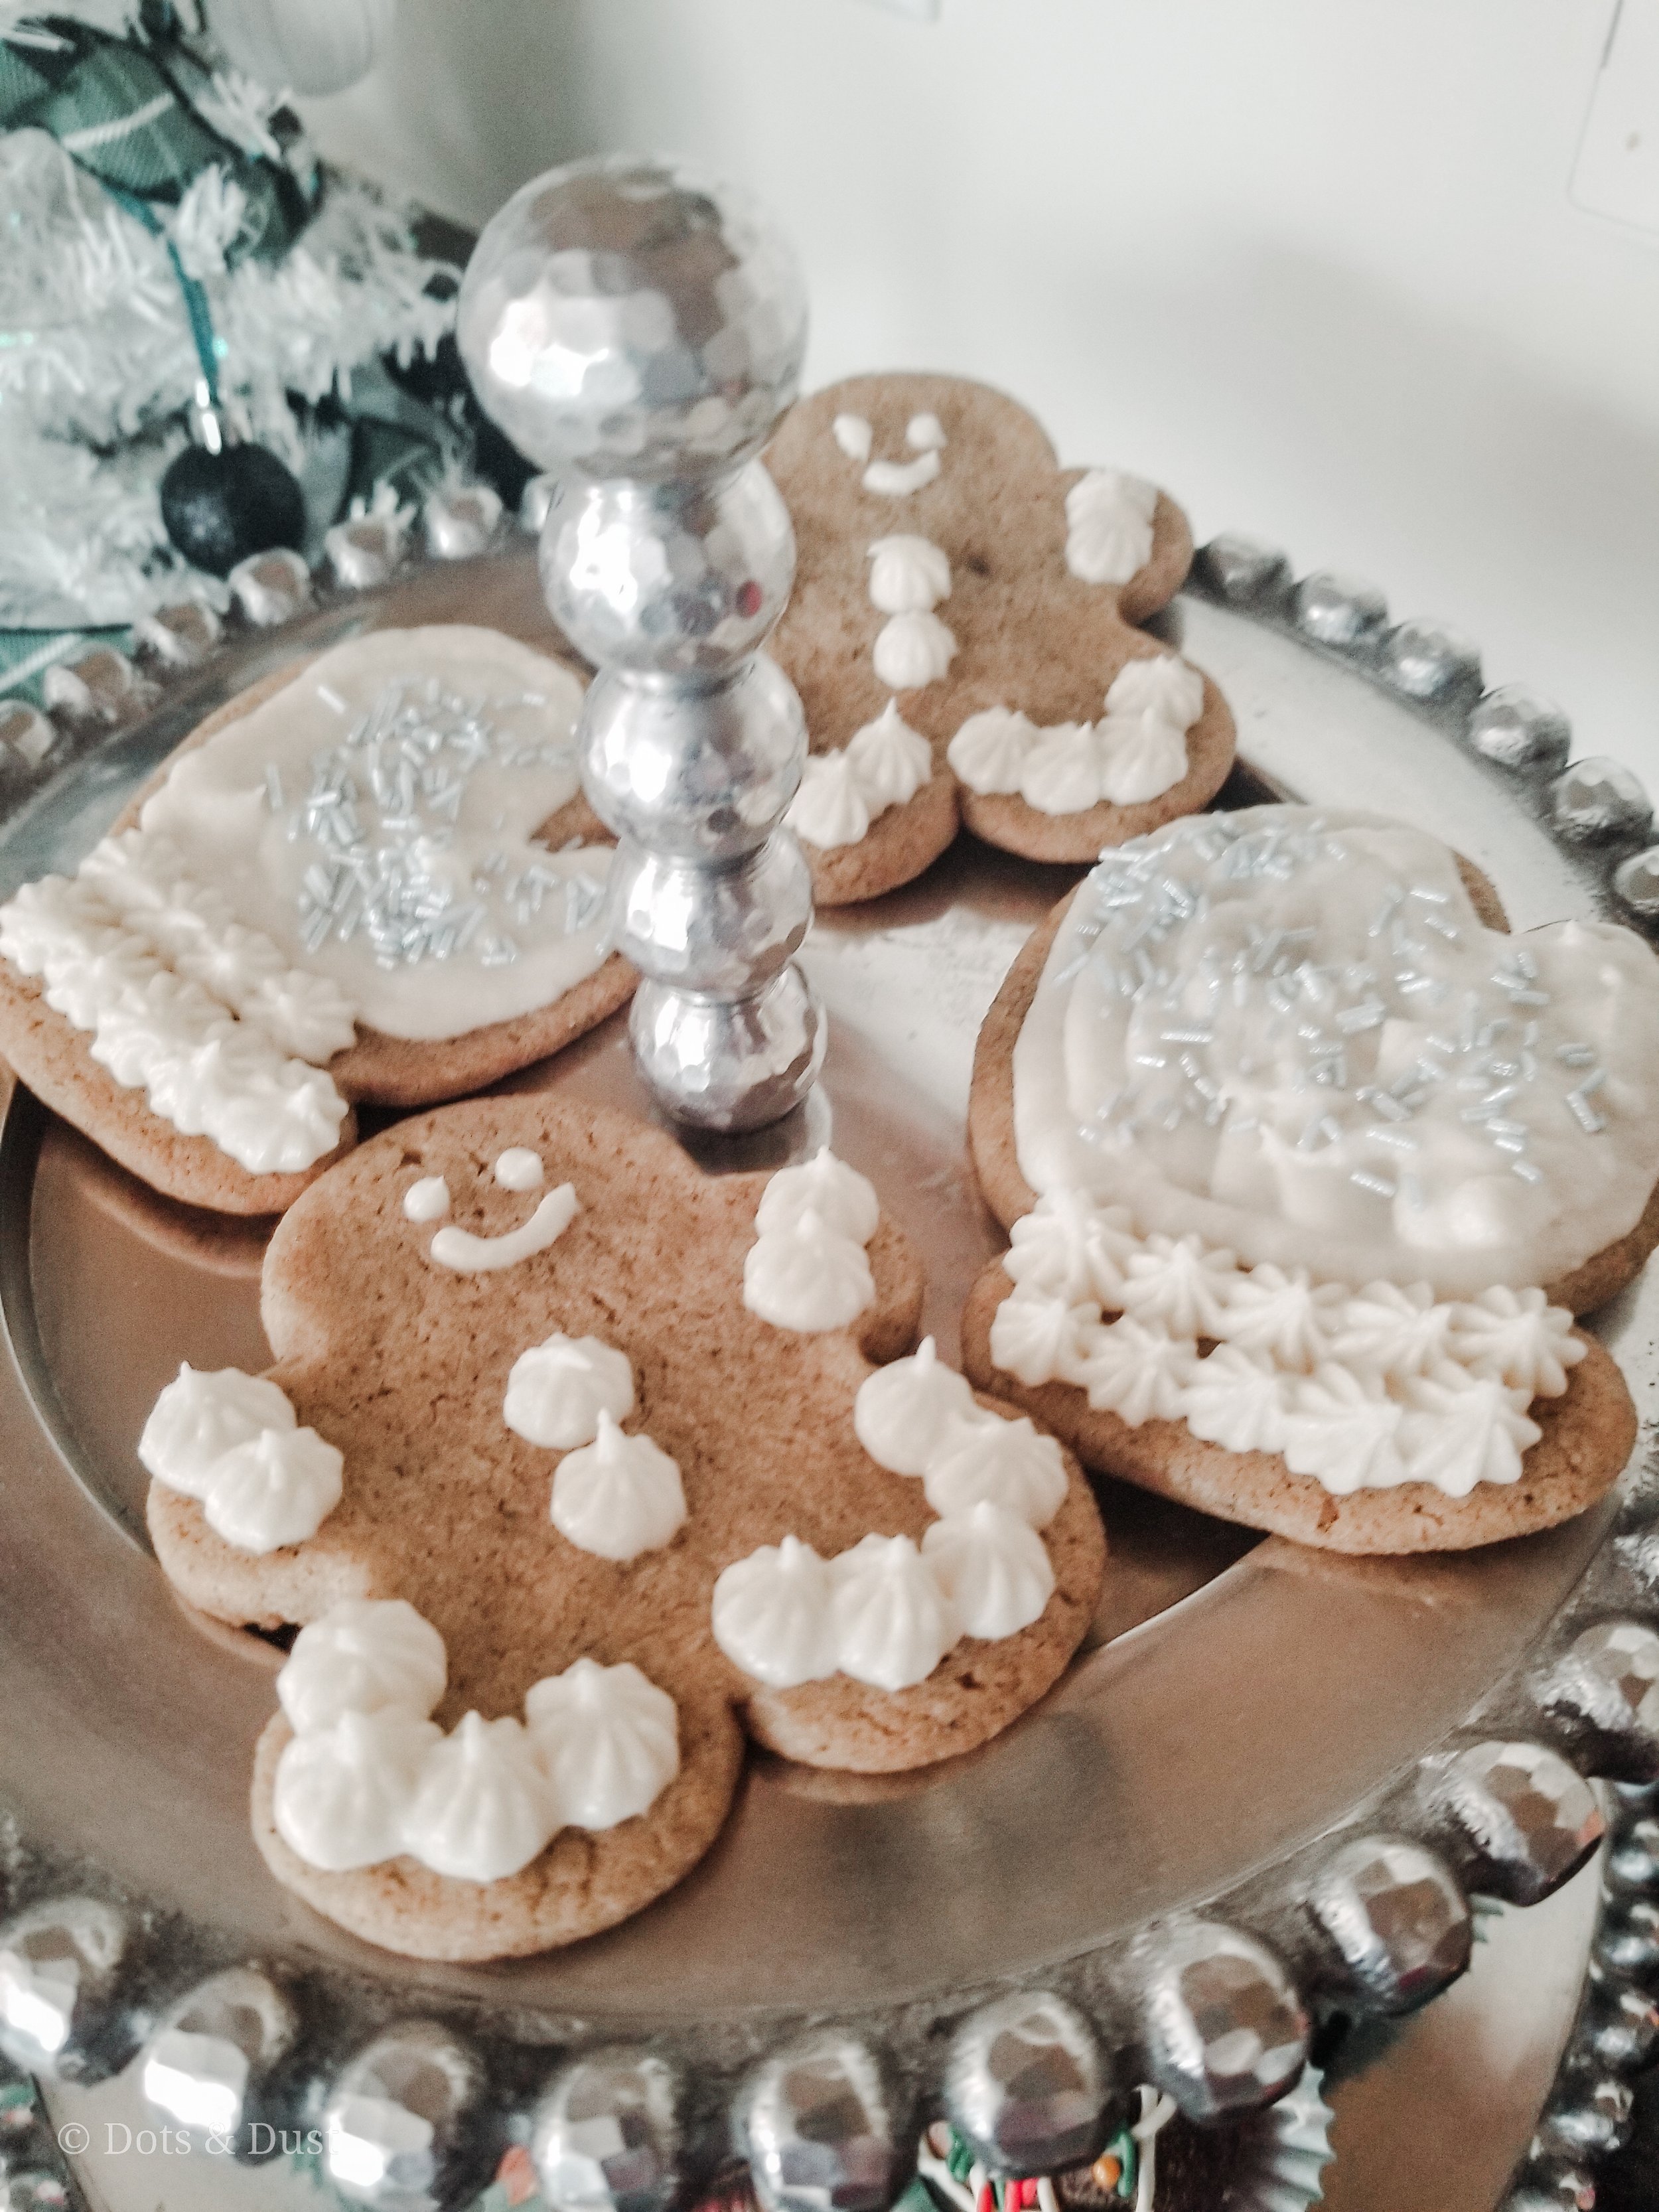 family holiday christmas baking chai cut out cookies butter frosting williamsburg dots and dust williamsburg virginia december 2020-18.jpg